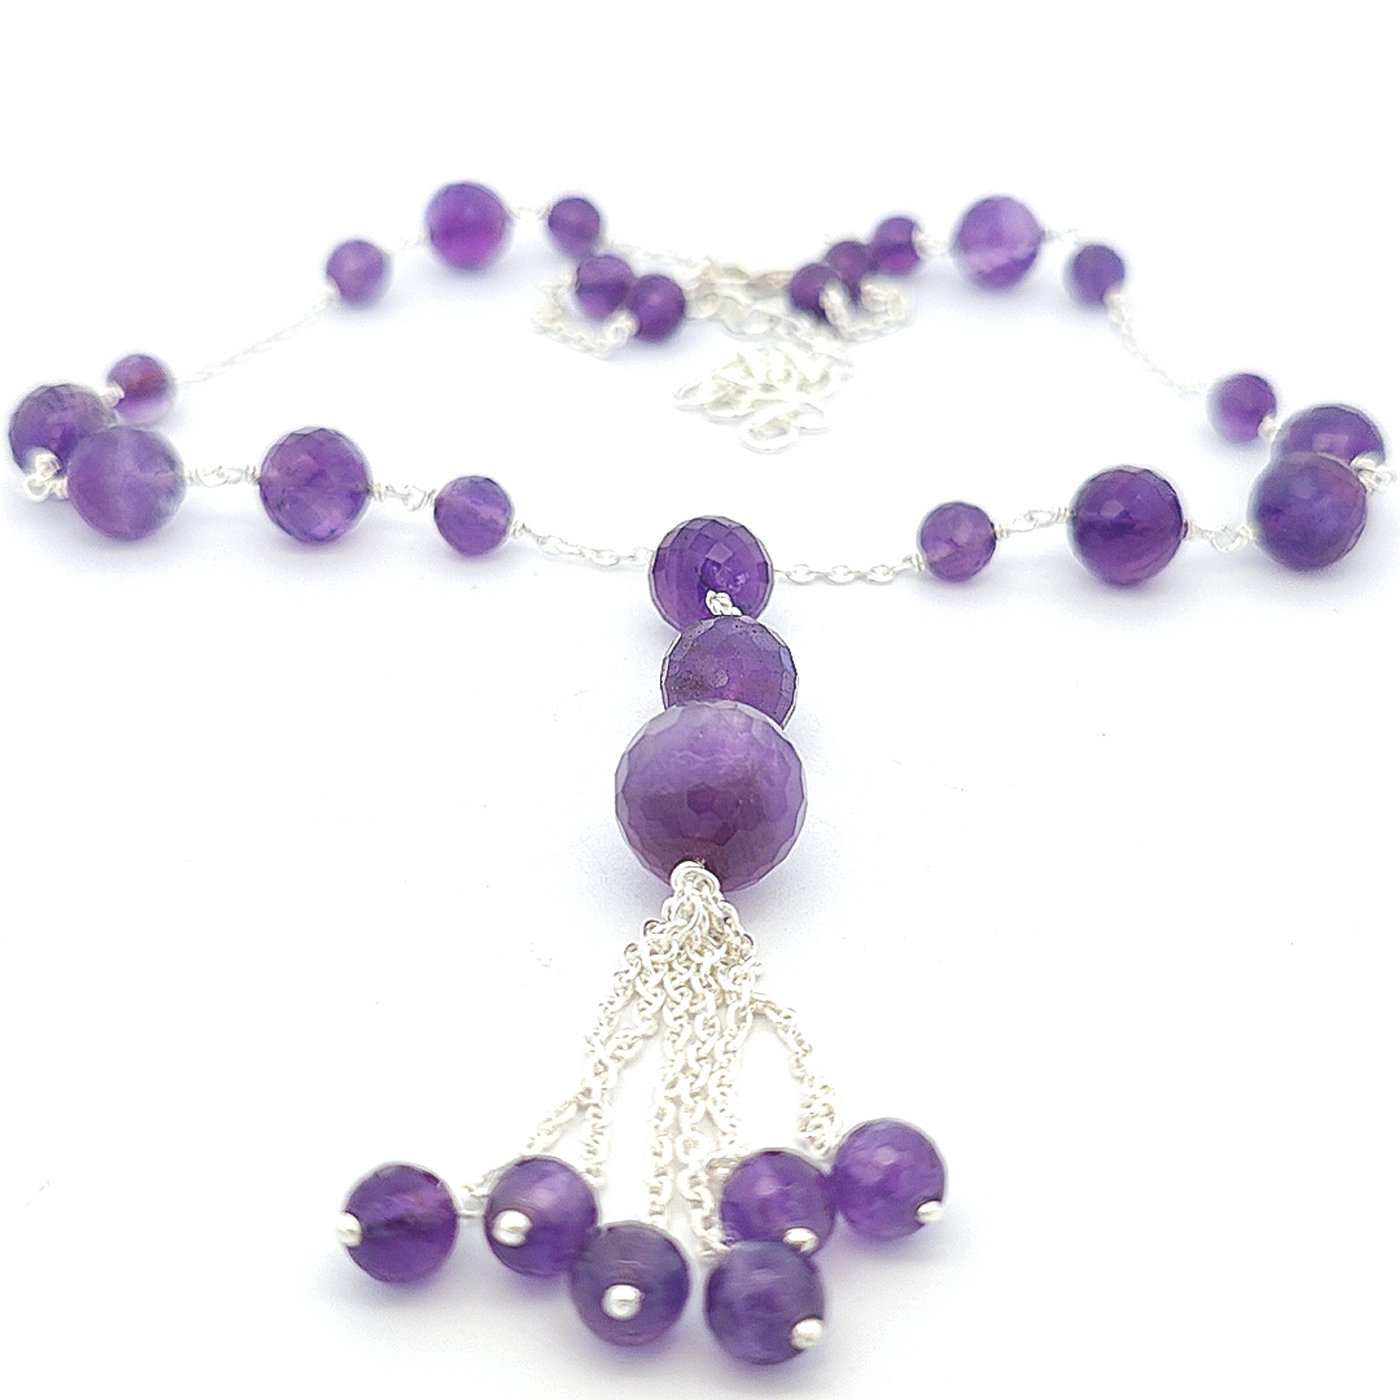 Amethyst Bead Necklace - Belle - boothandbooth